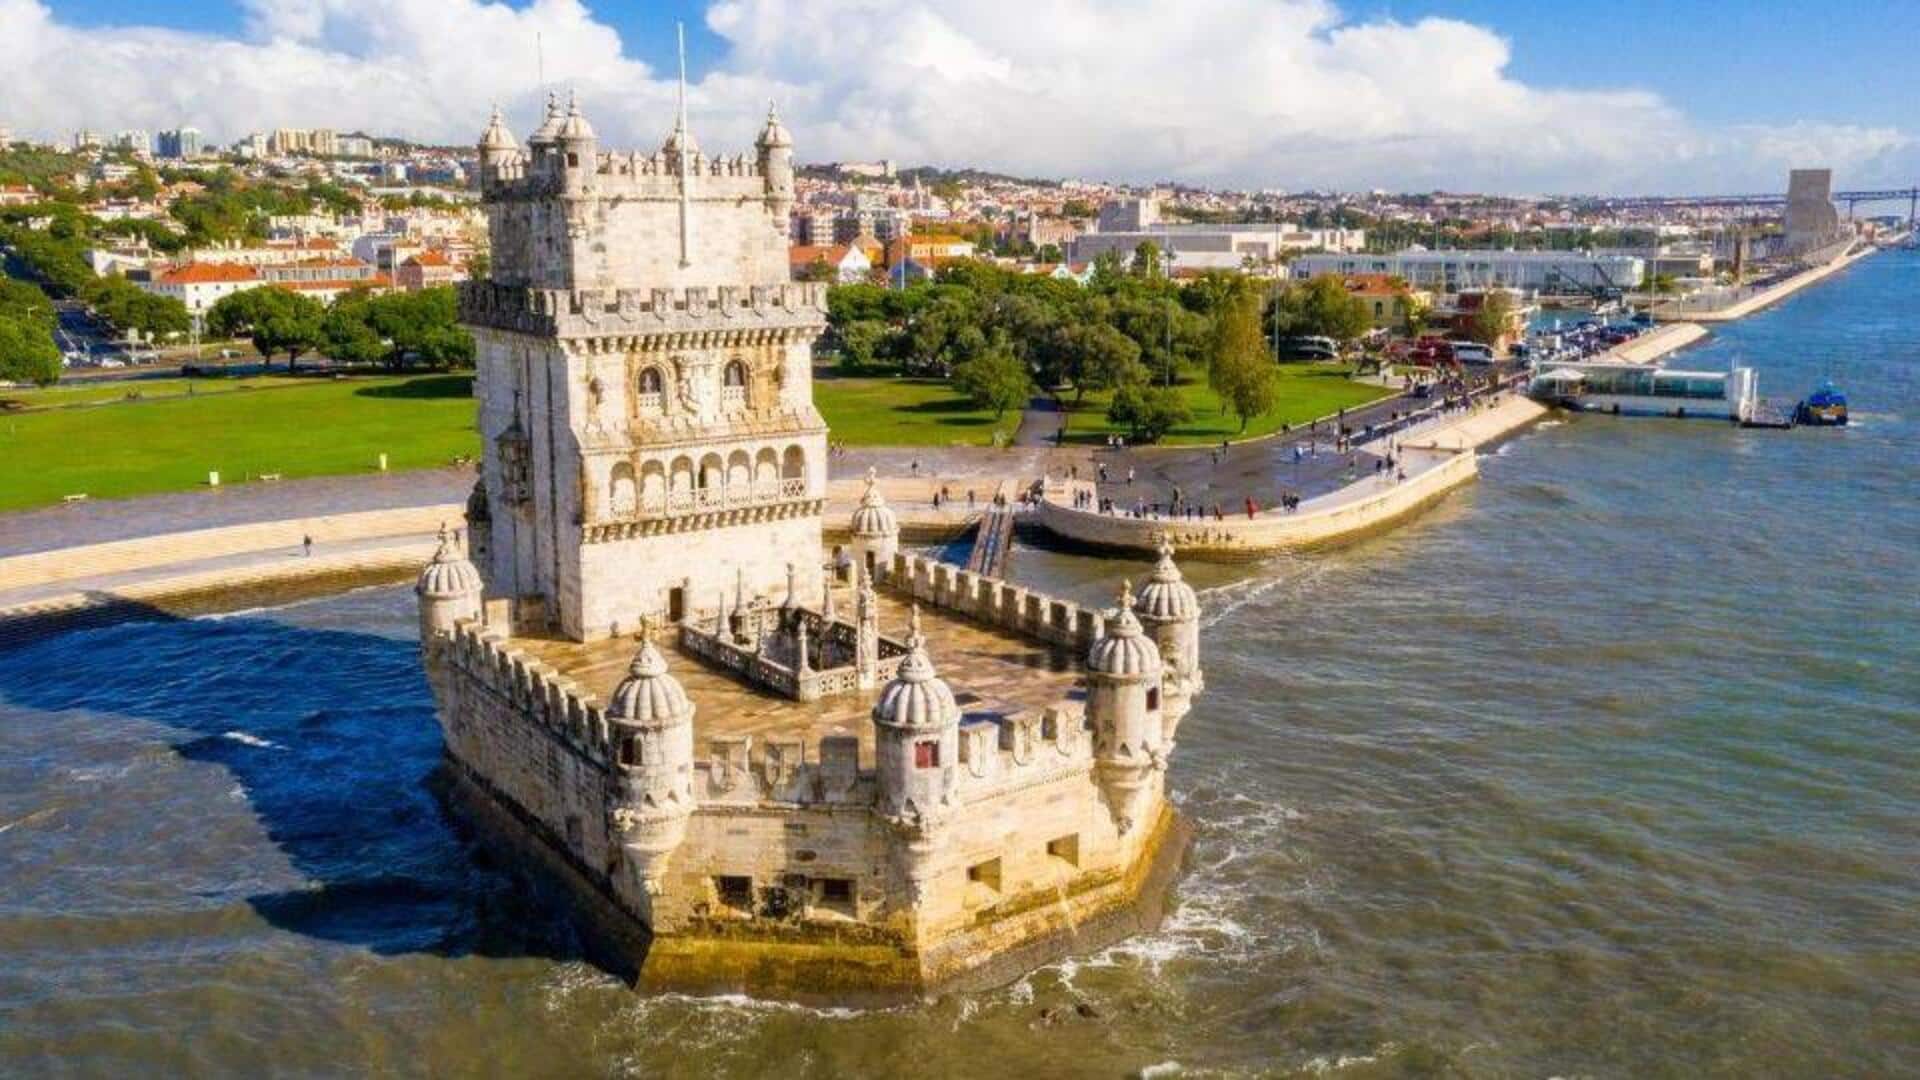 Head over to Lisbon's maritime heritage sites